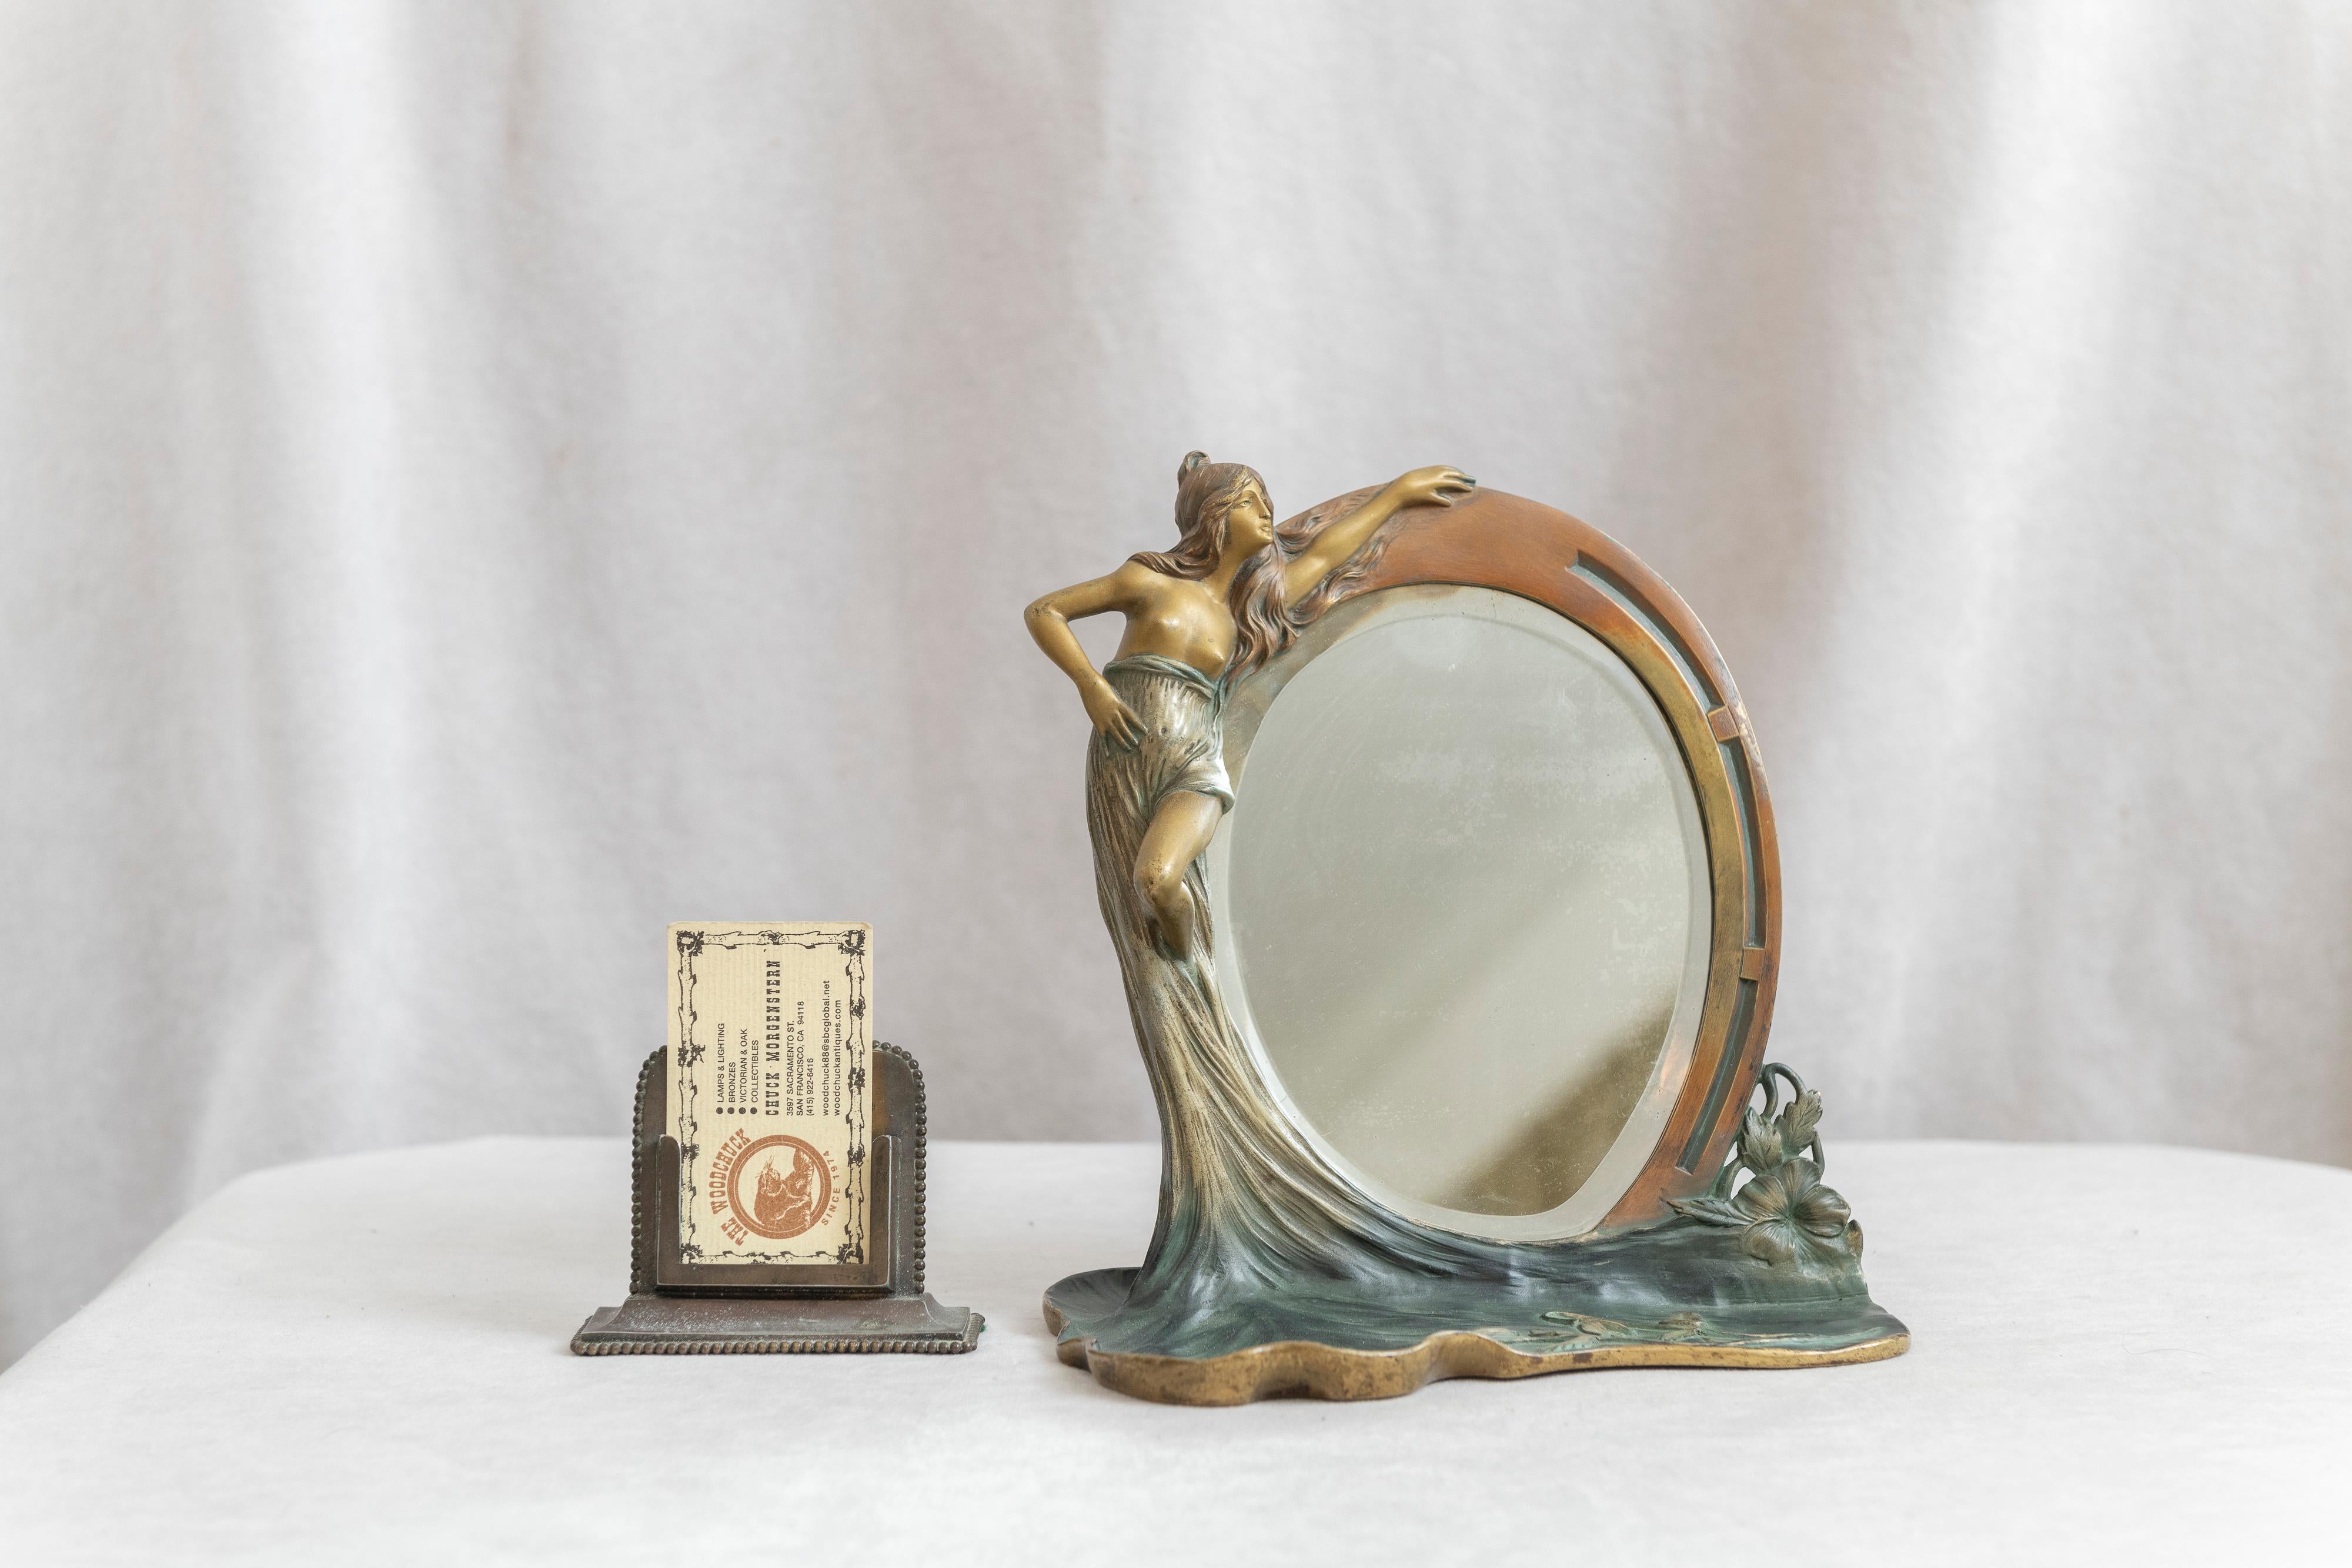 A fine example of a figural art nouveau mirror in bronze. A young woman holding a beveled mirror with a flat area below covered in flowers. We especially loved that flat area for it's attention to the detailing of the flowers, and it's rich factory